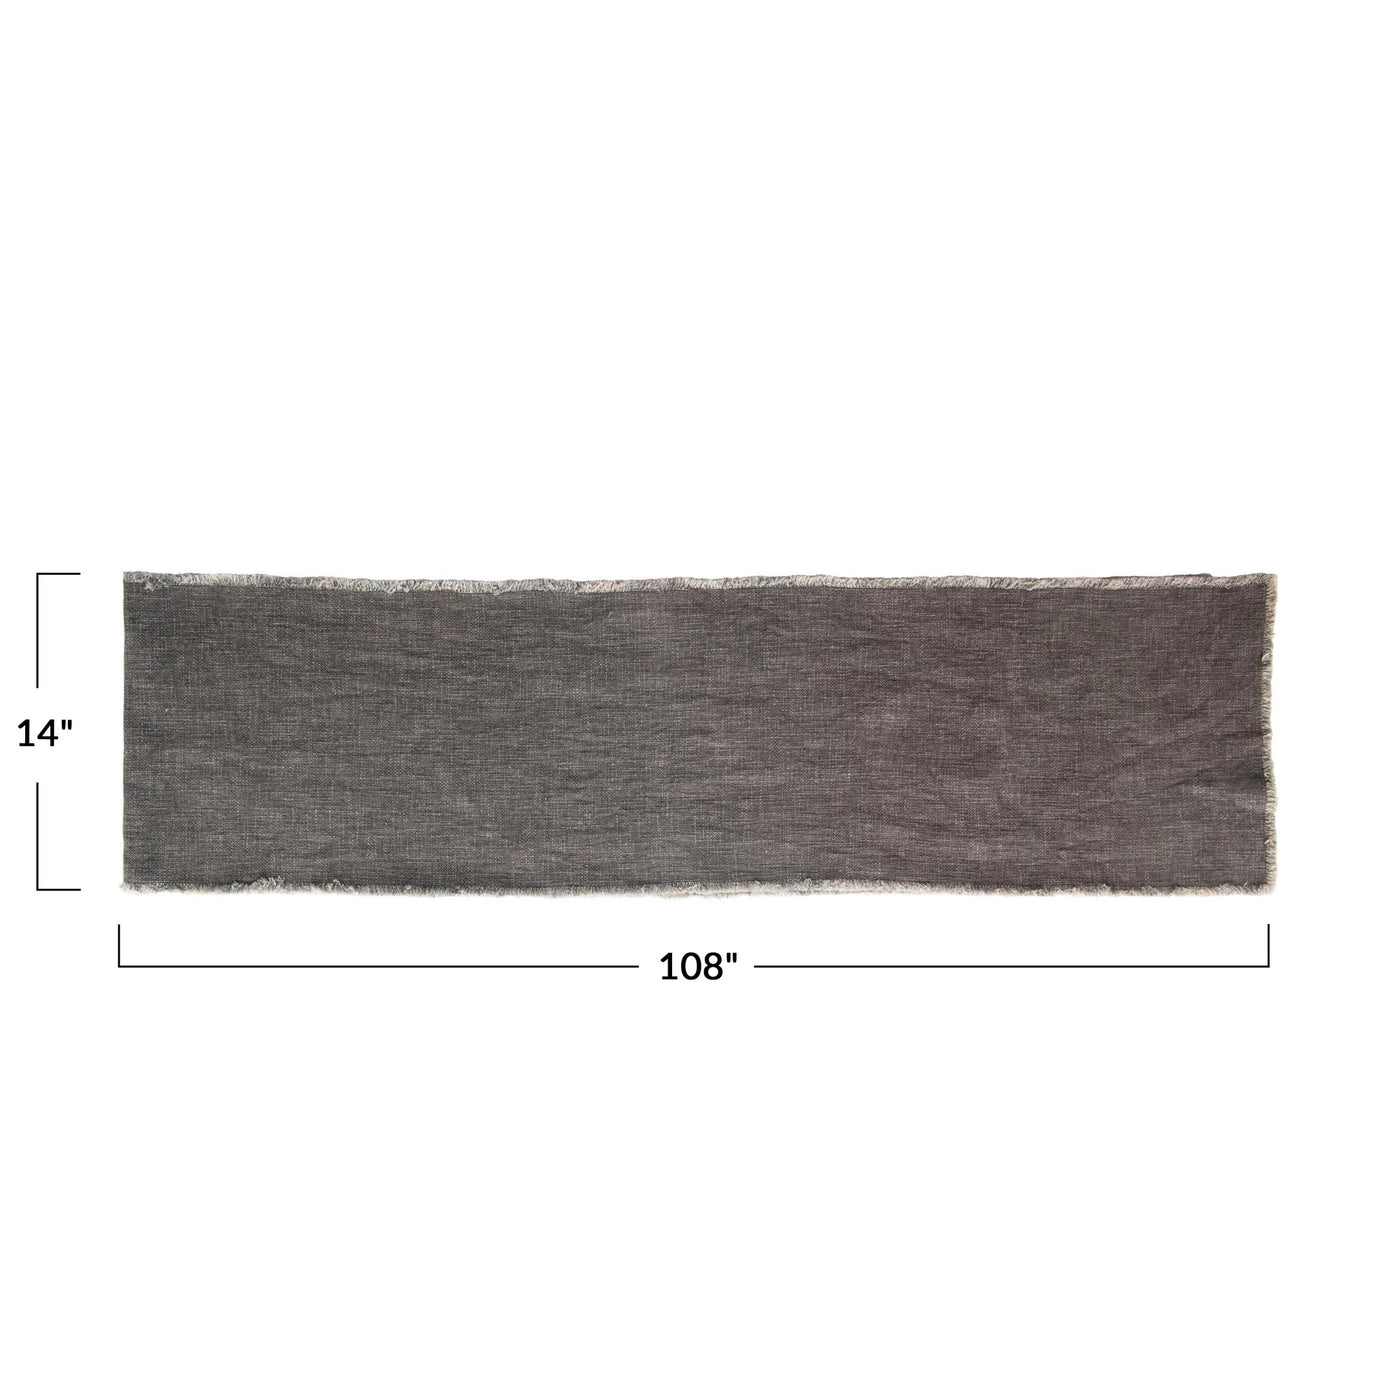 Lille Table Runner - charcoal